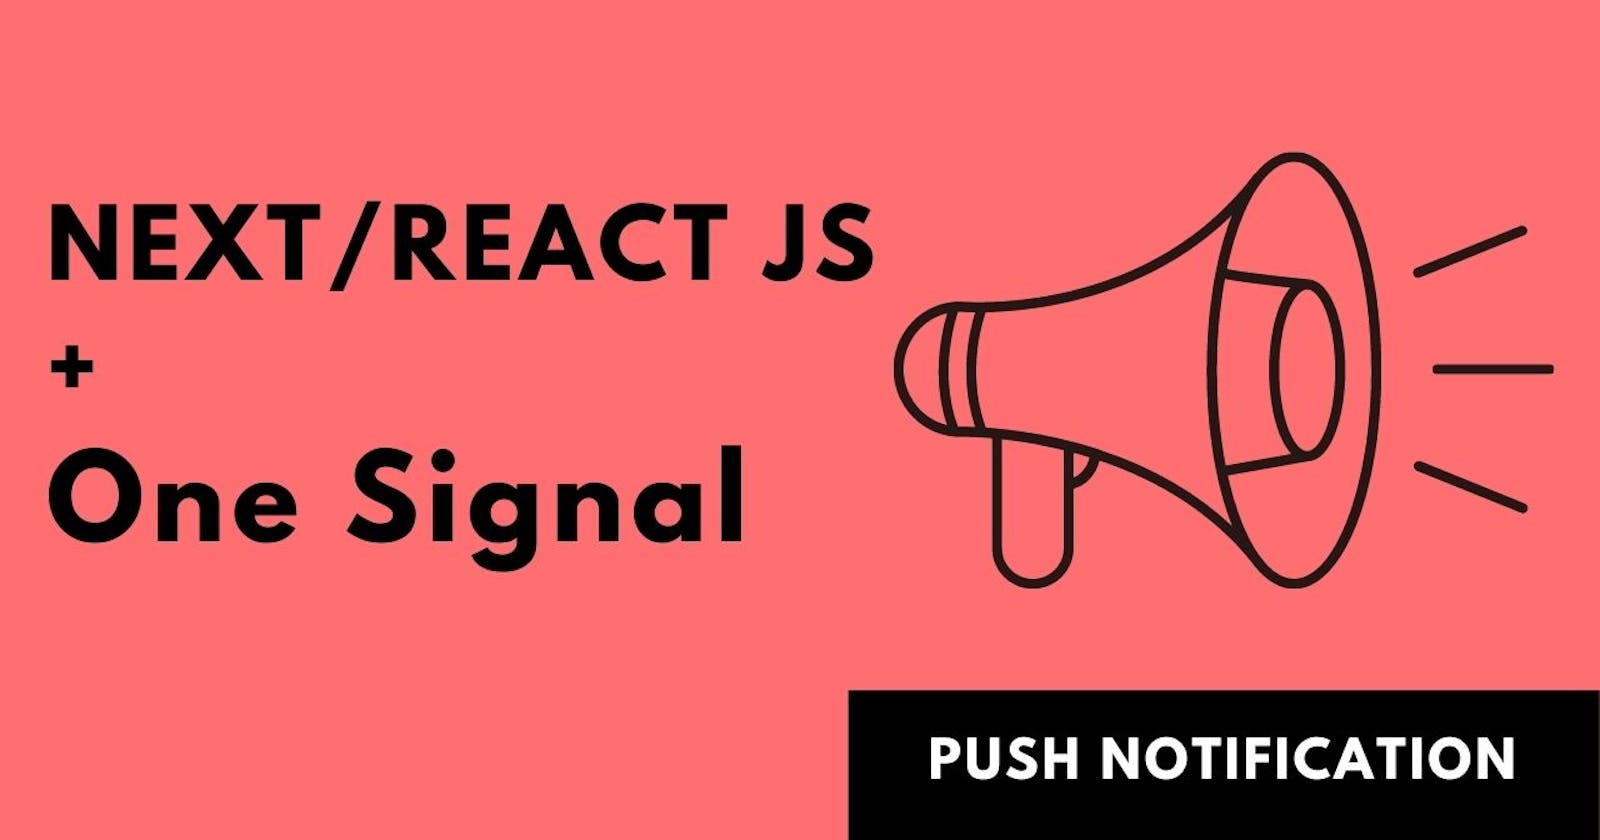 How to add push notification in a Next/React JS App?